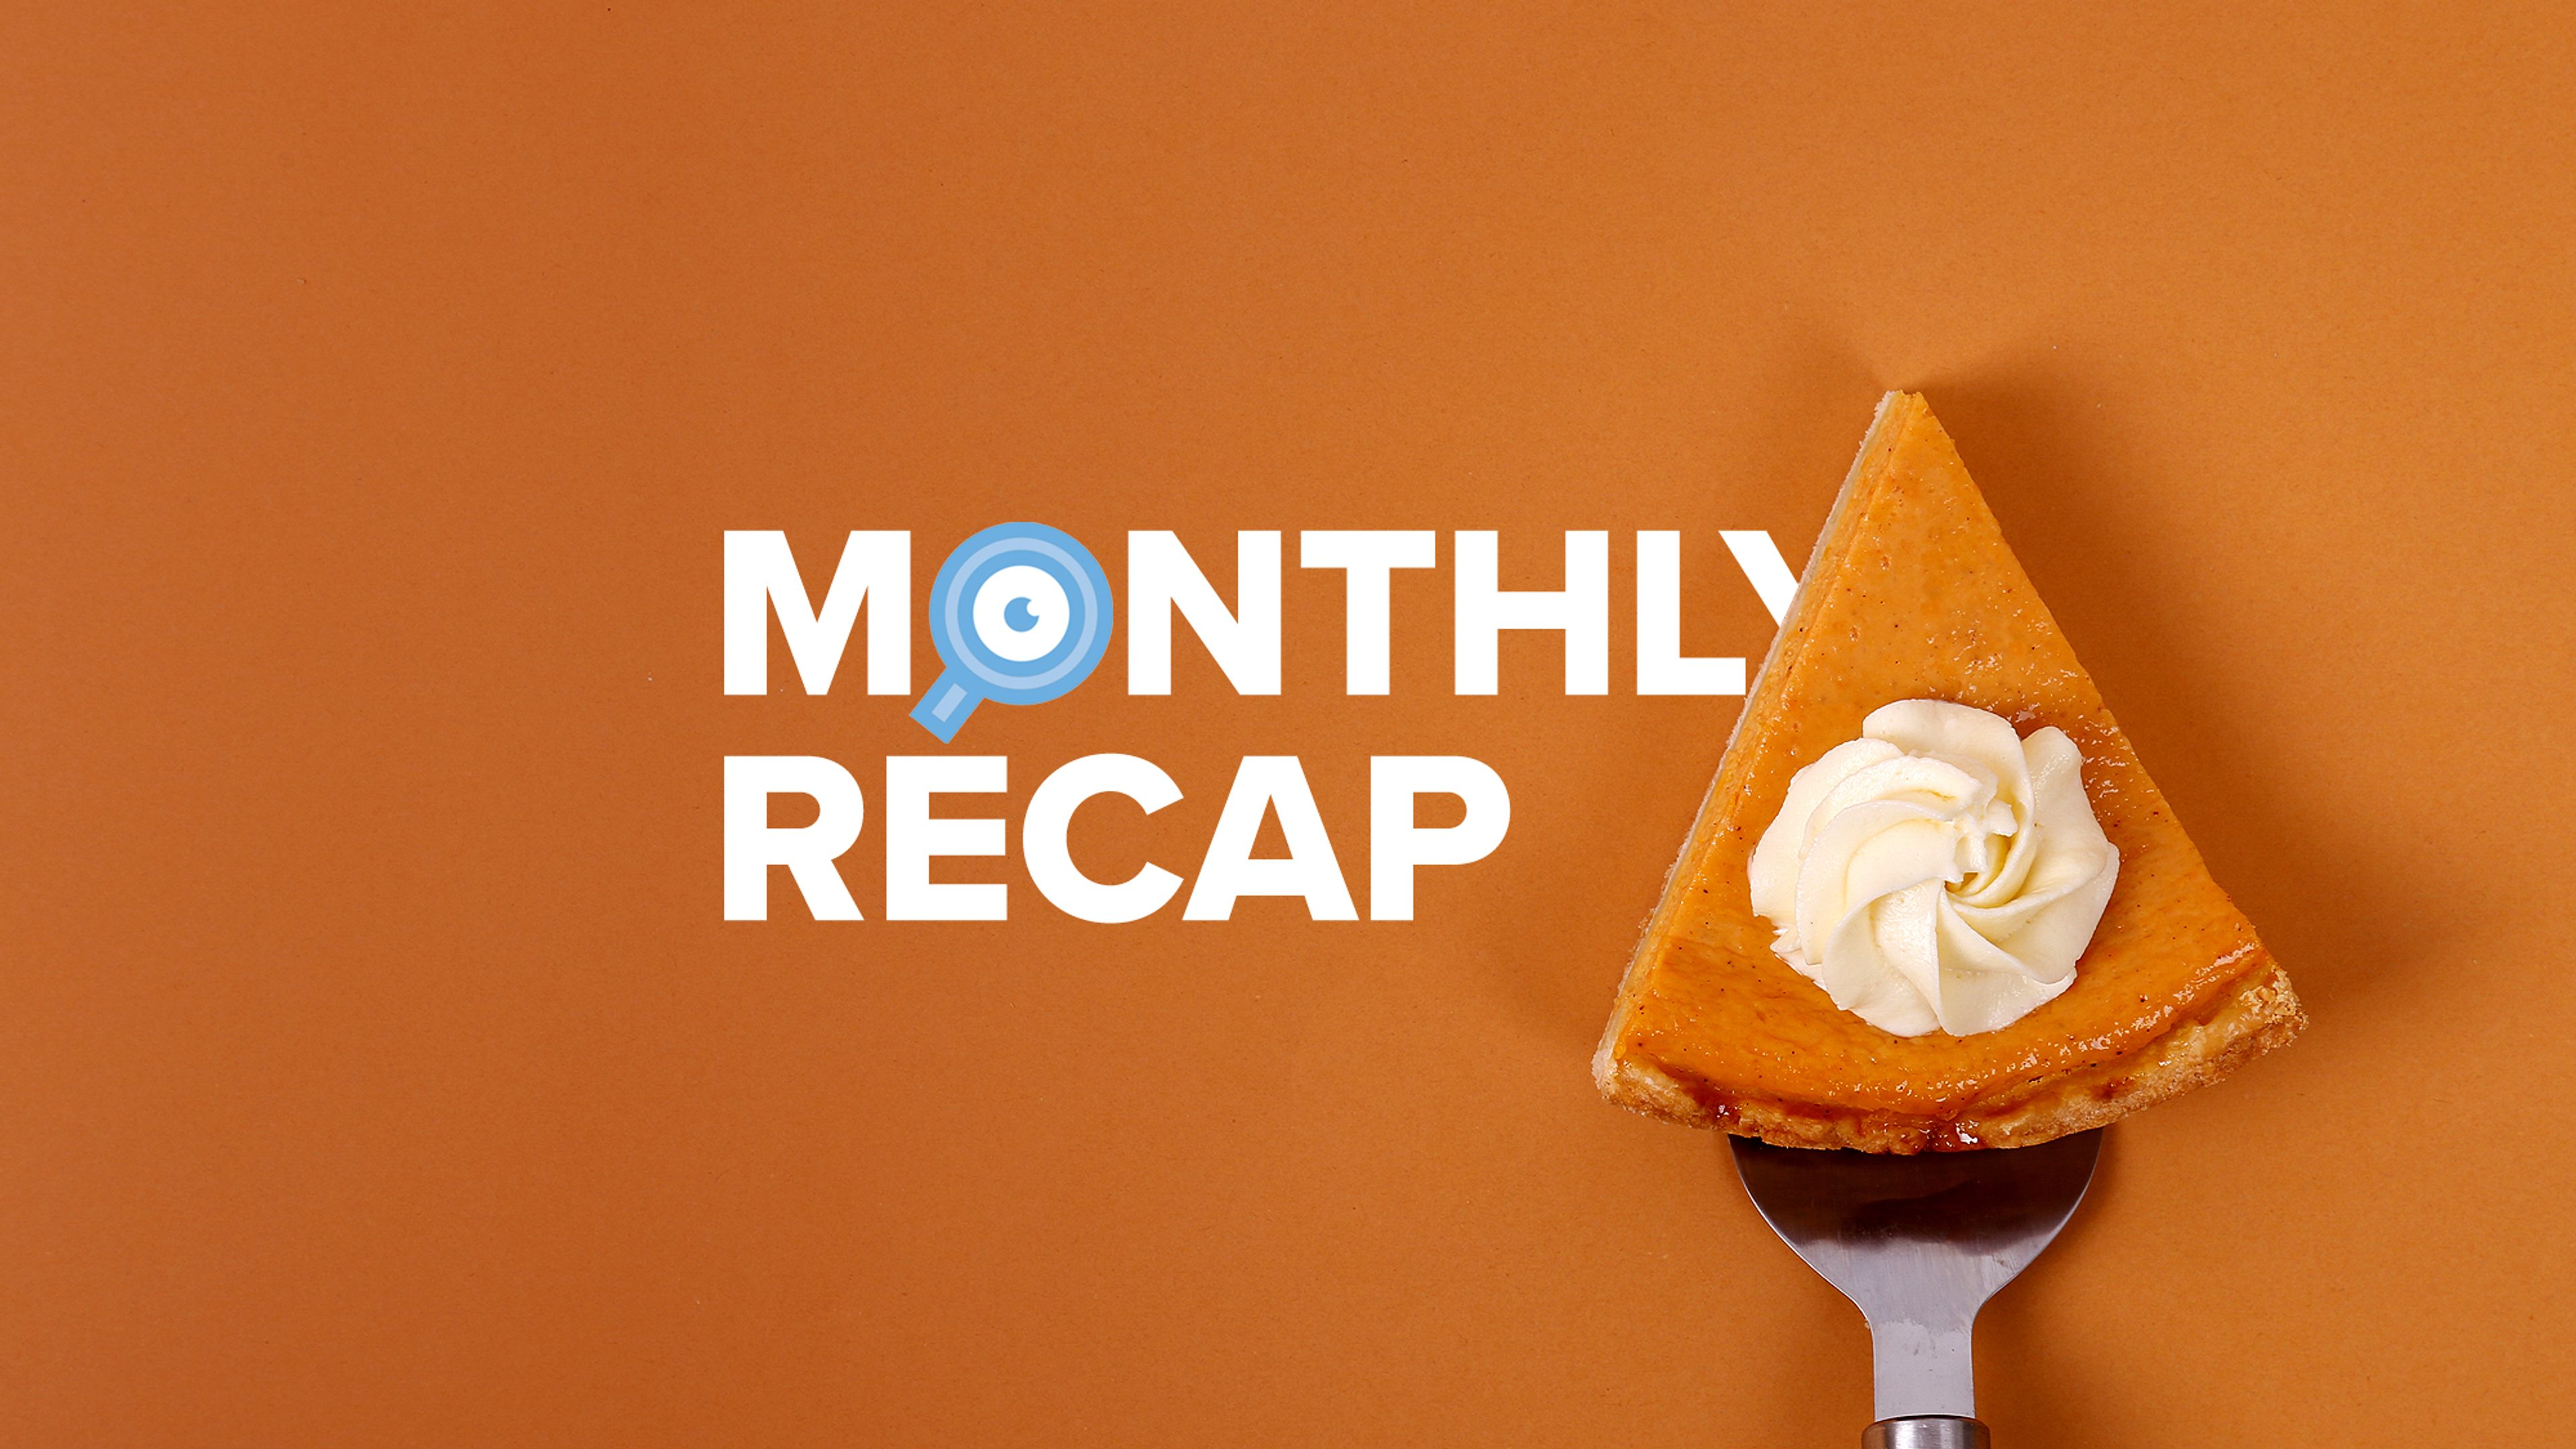 Monthly Recap featured image with title text against a photo of a slice of pumpkin pie with whipped cream